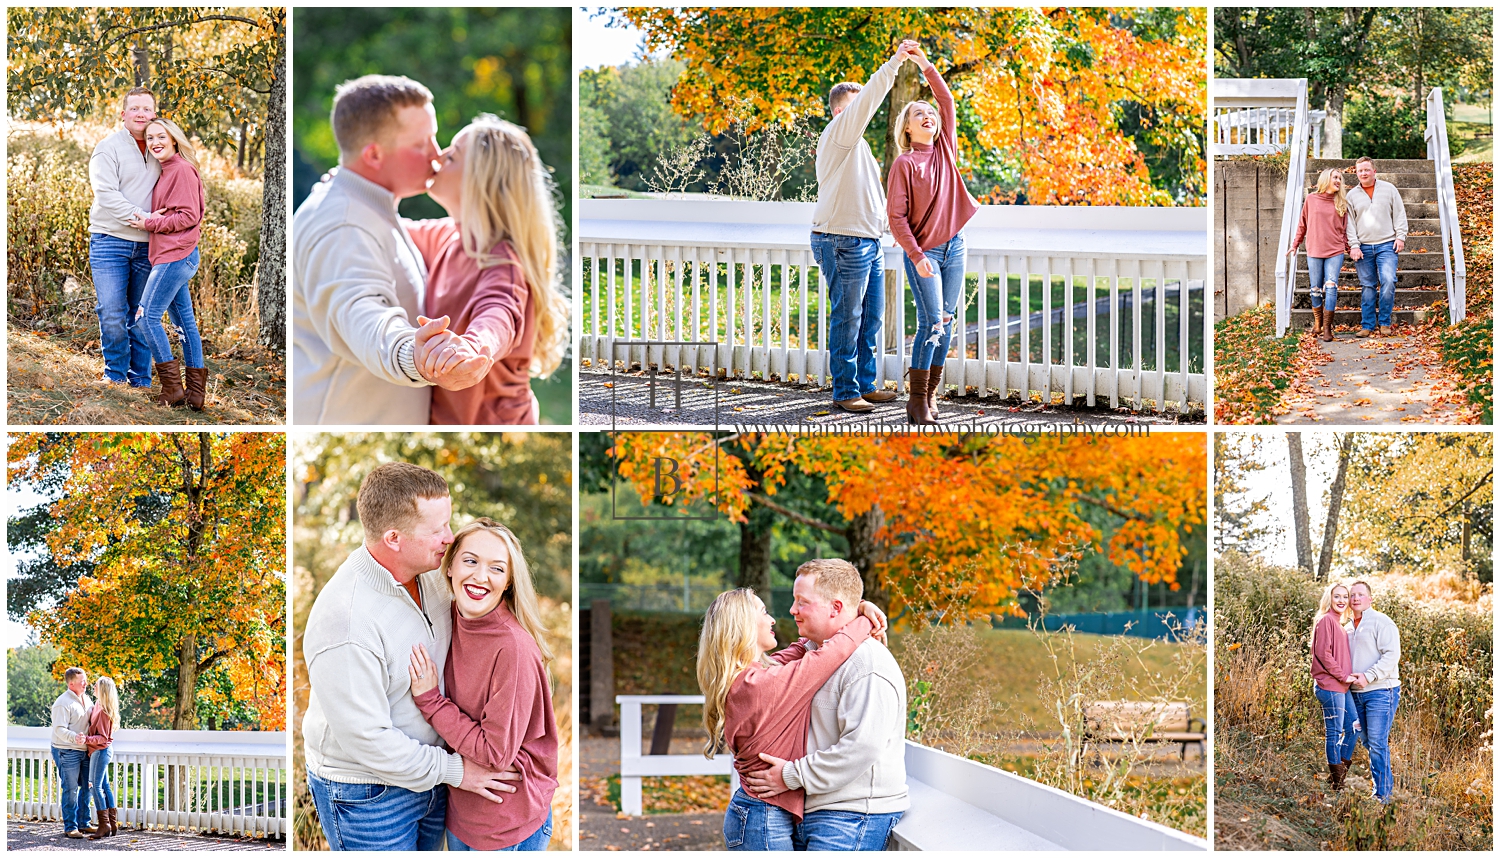 Couple stands by white fence in fall for engagement session photos.